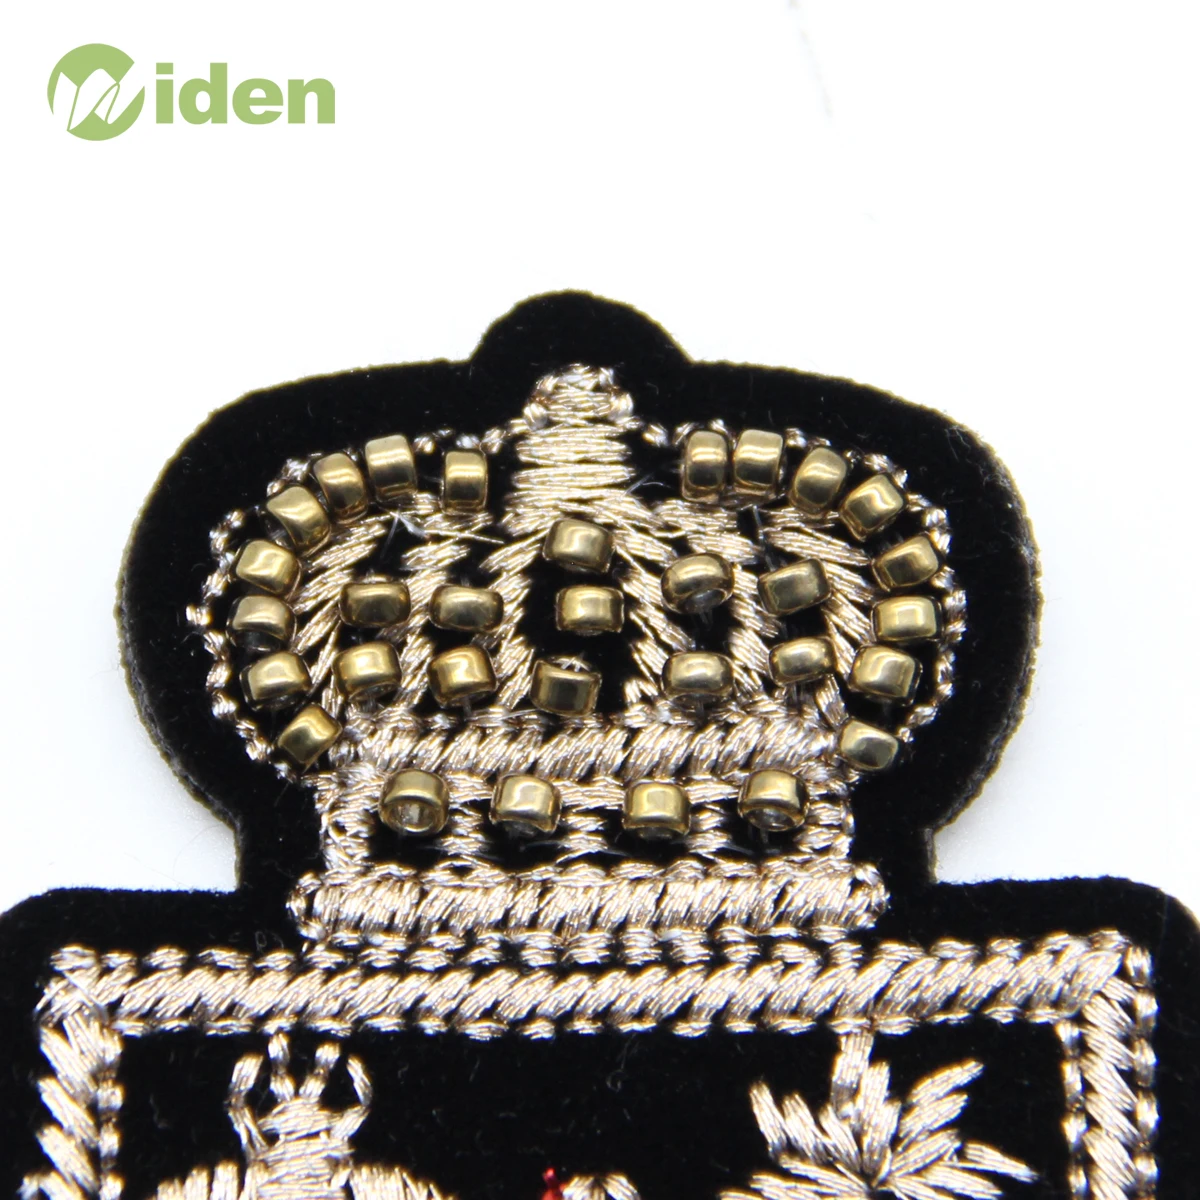 Personalized Uniform Patch Lurex Embroidered Beads Patch